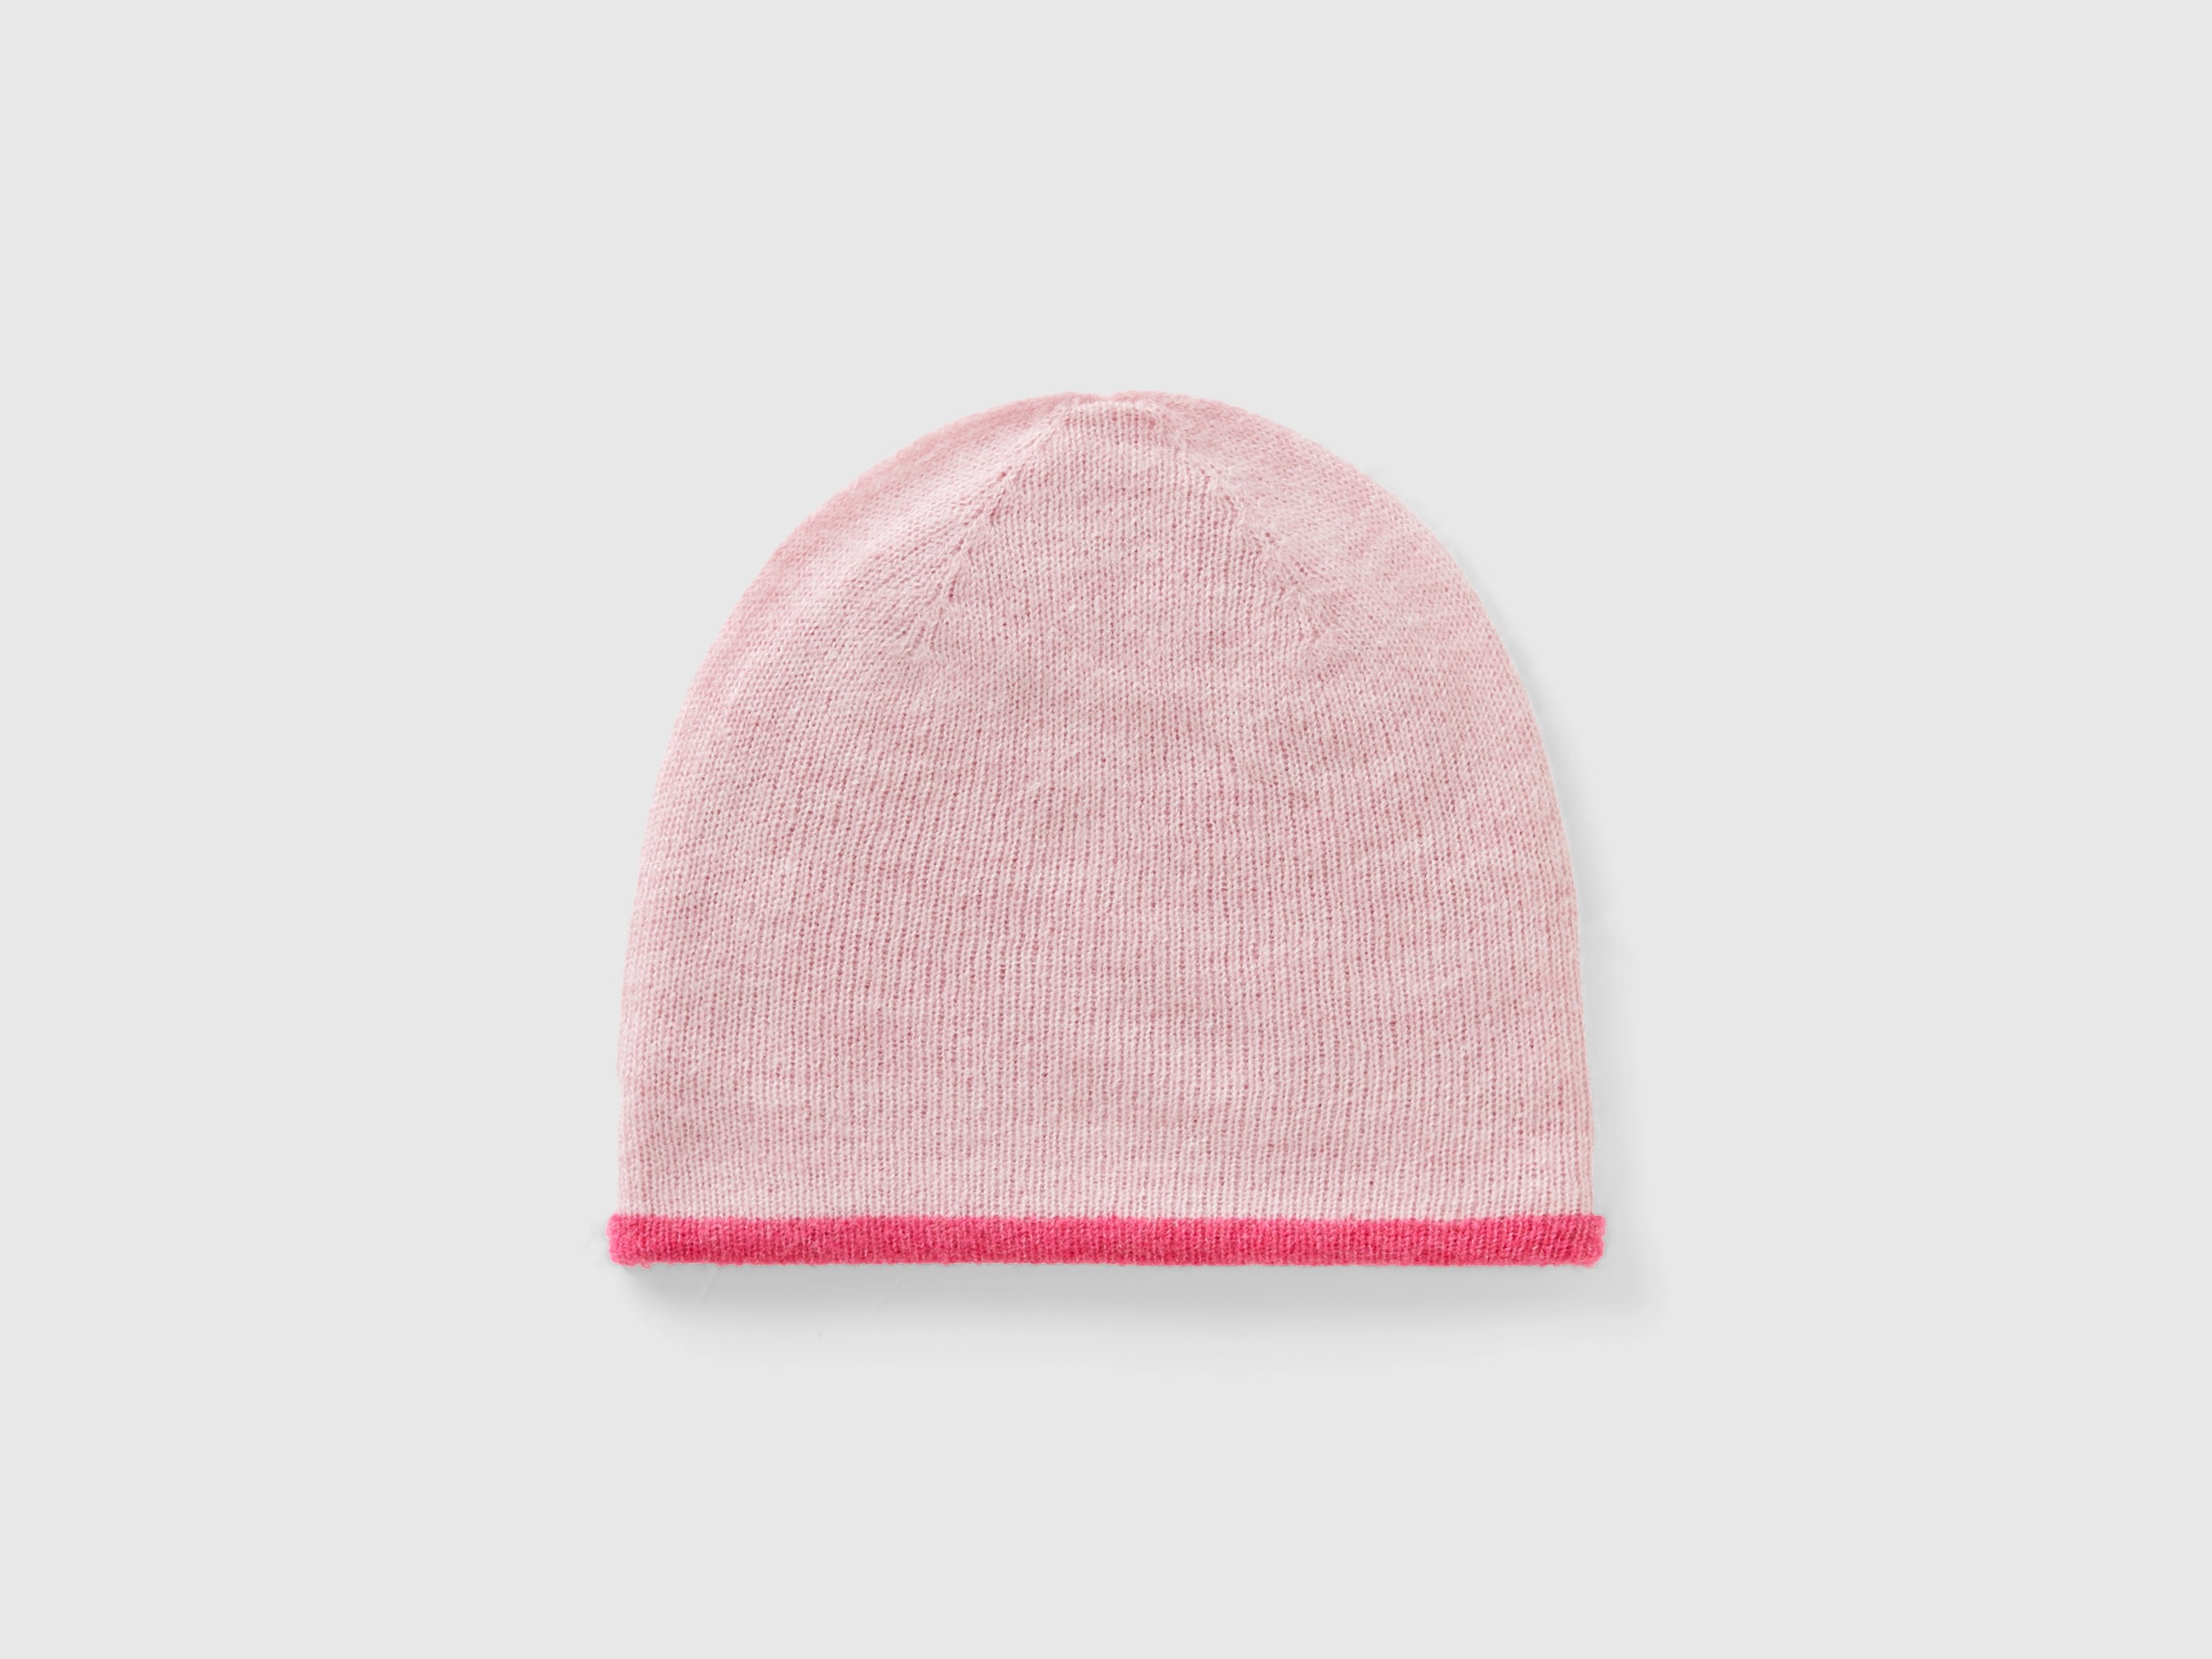 Benetton, Reversible Hat In Viscose Blend, size S-L, Pink, Kids